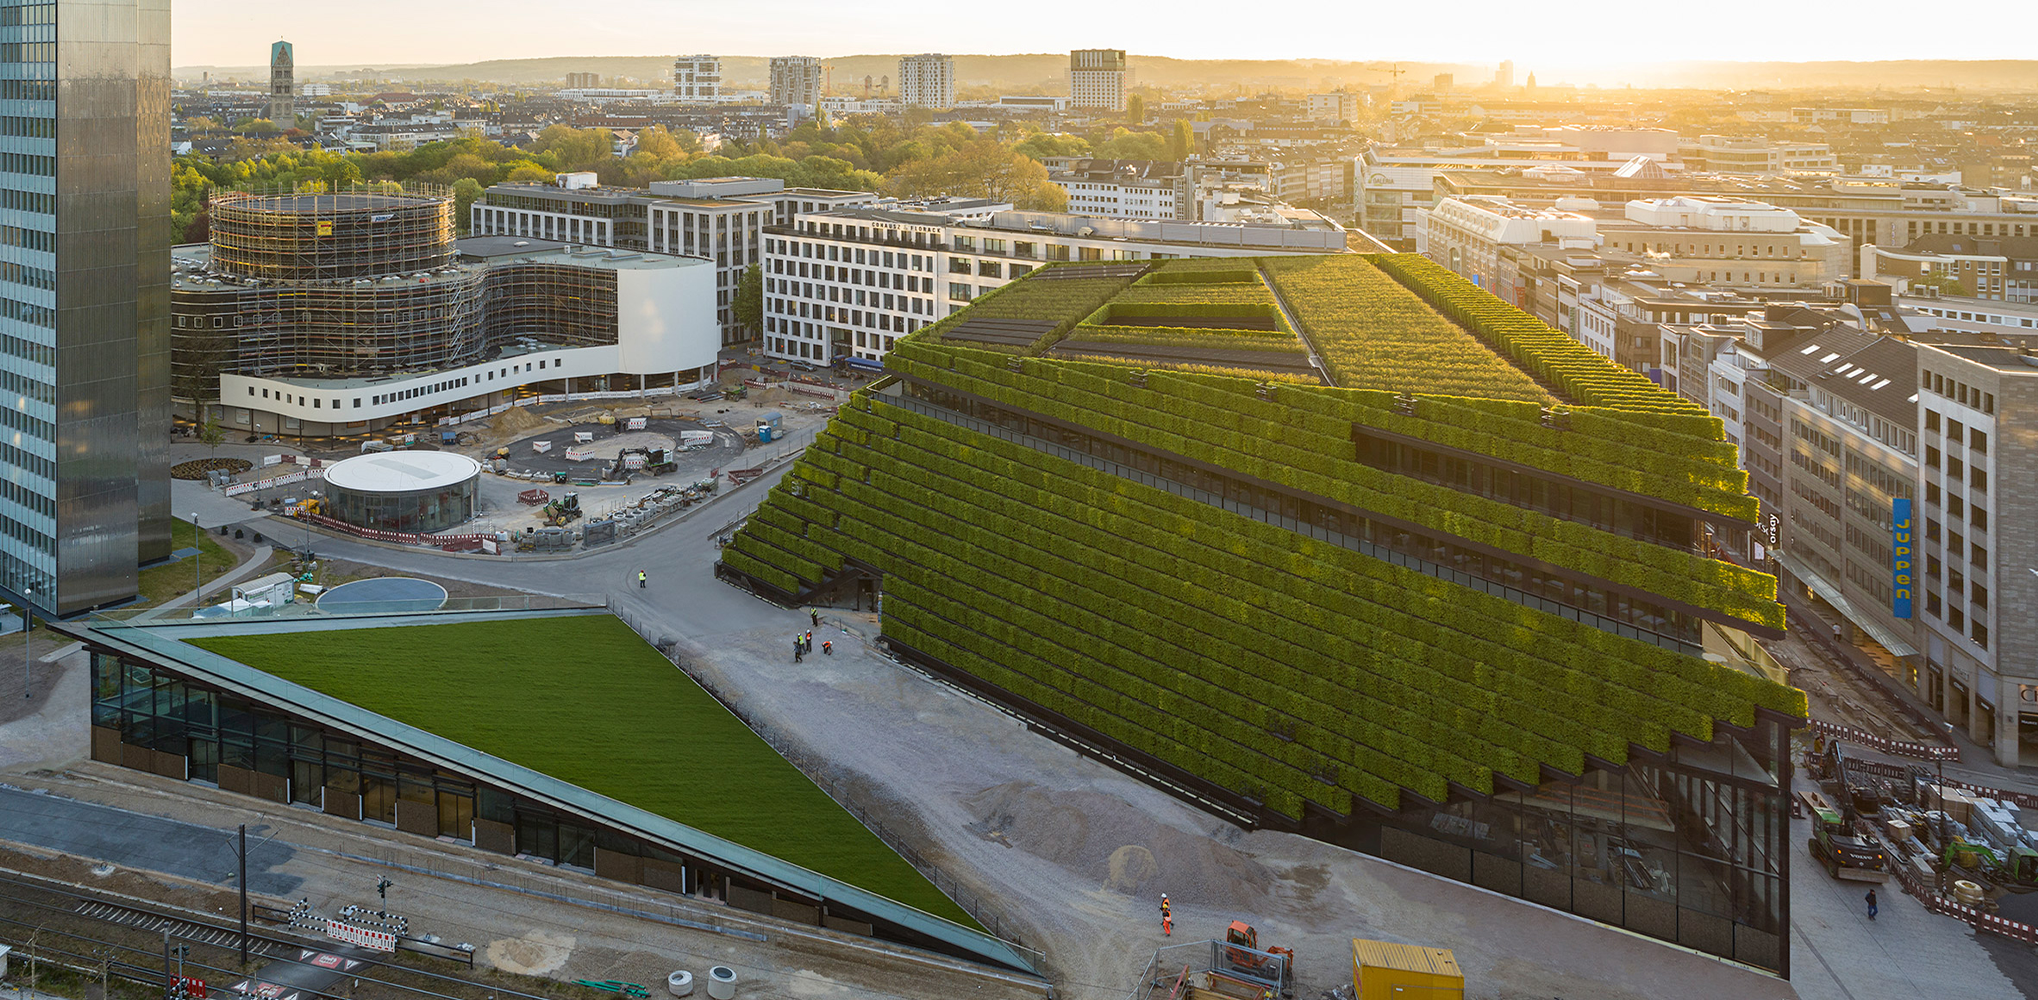 Europe S Largest Green Facade Has Been Completed In Germany Architizer Journal